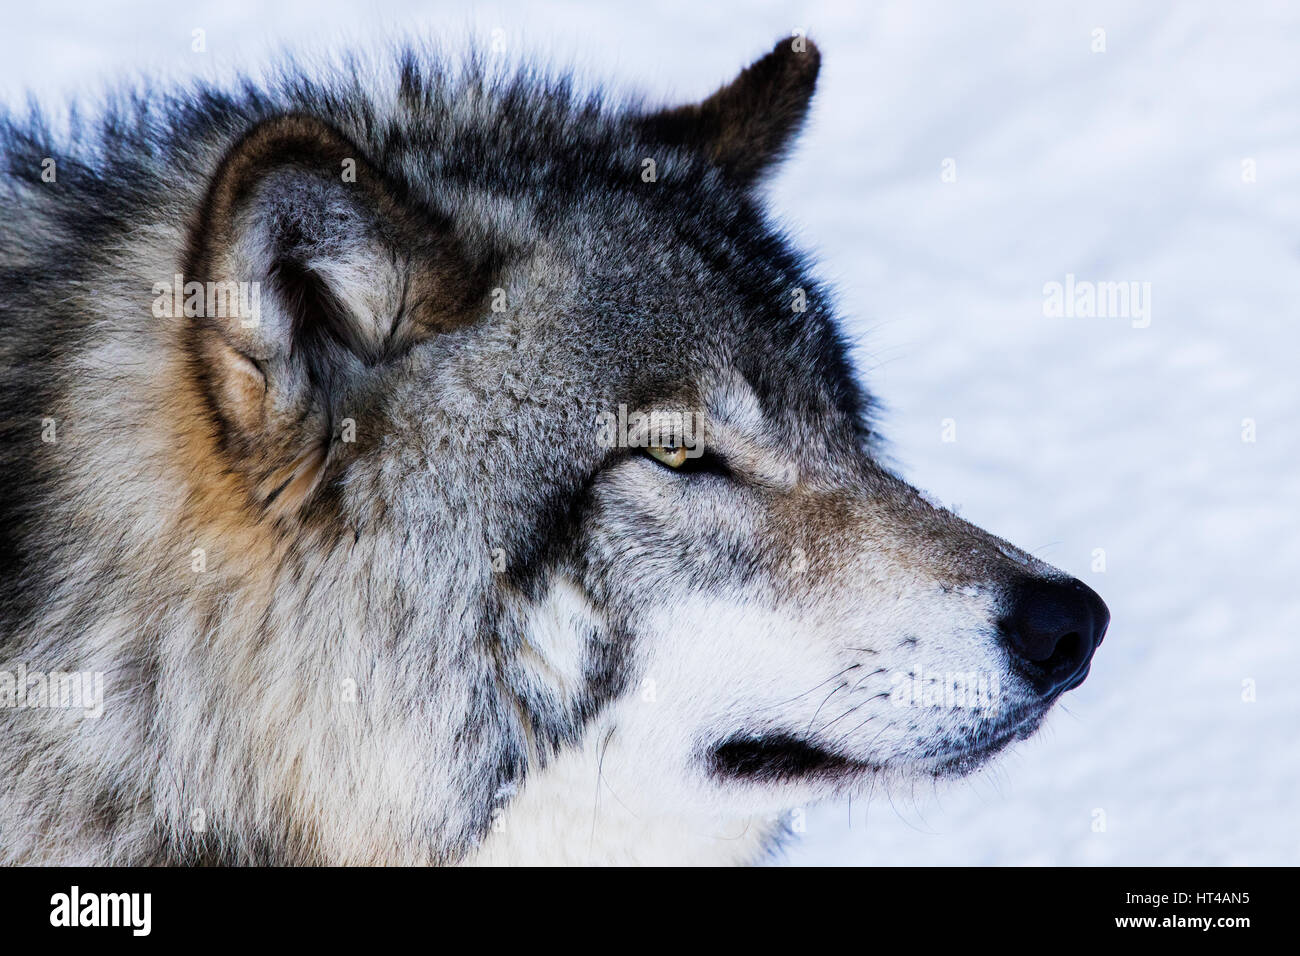 Timber wolf portrait in winter Stock Photo - Alamy